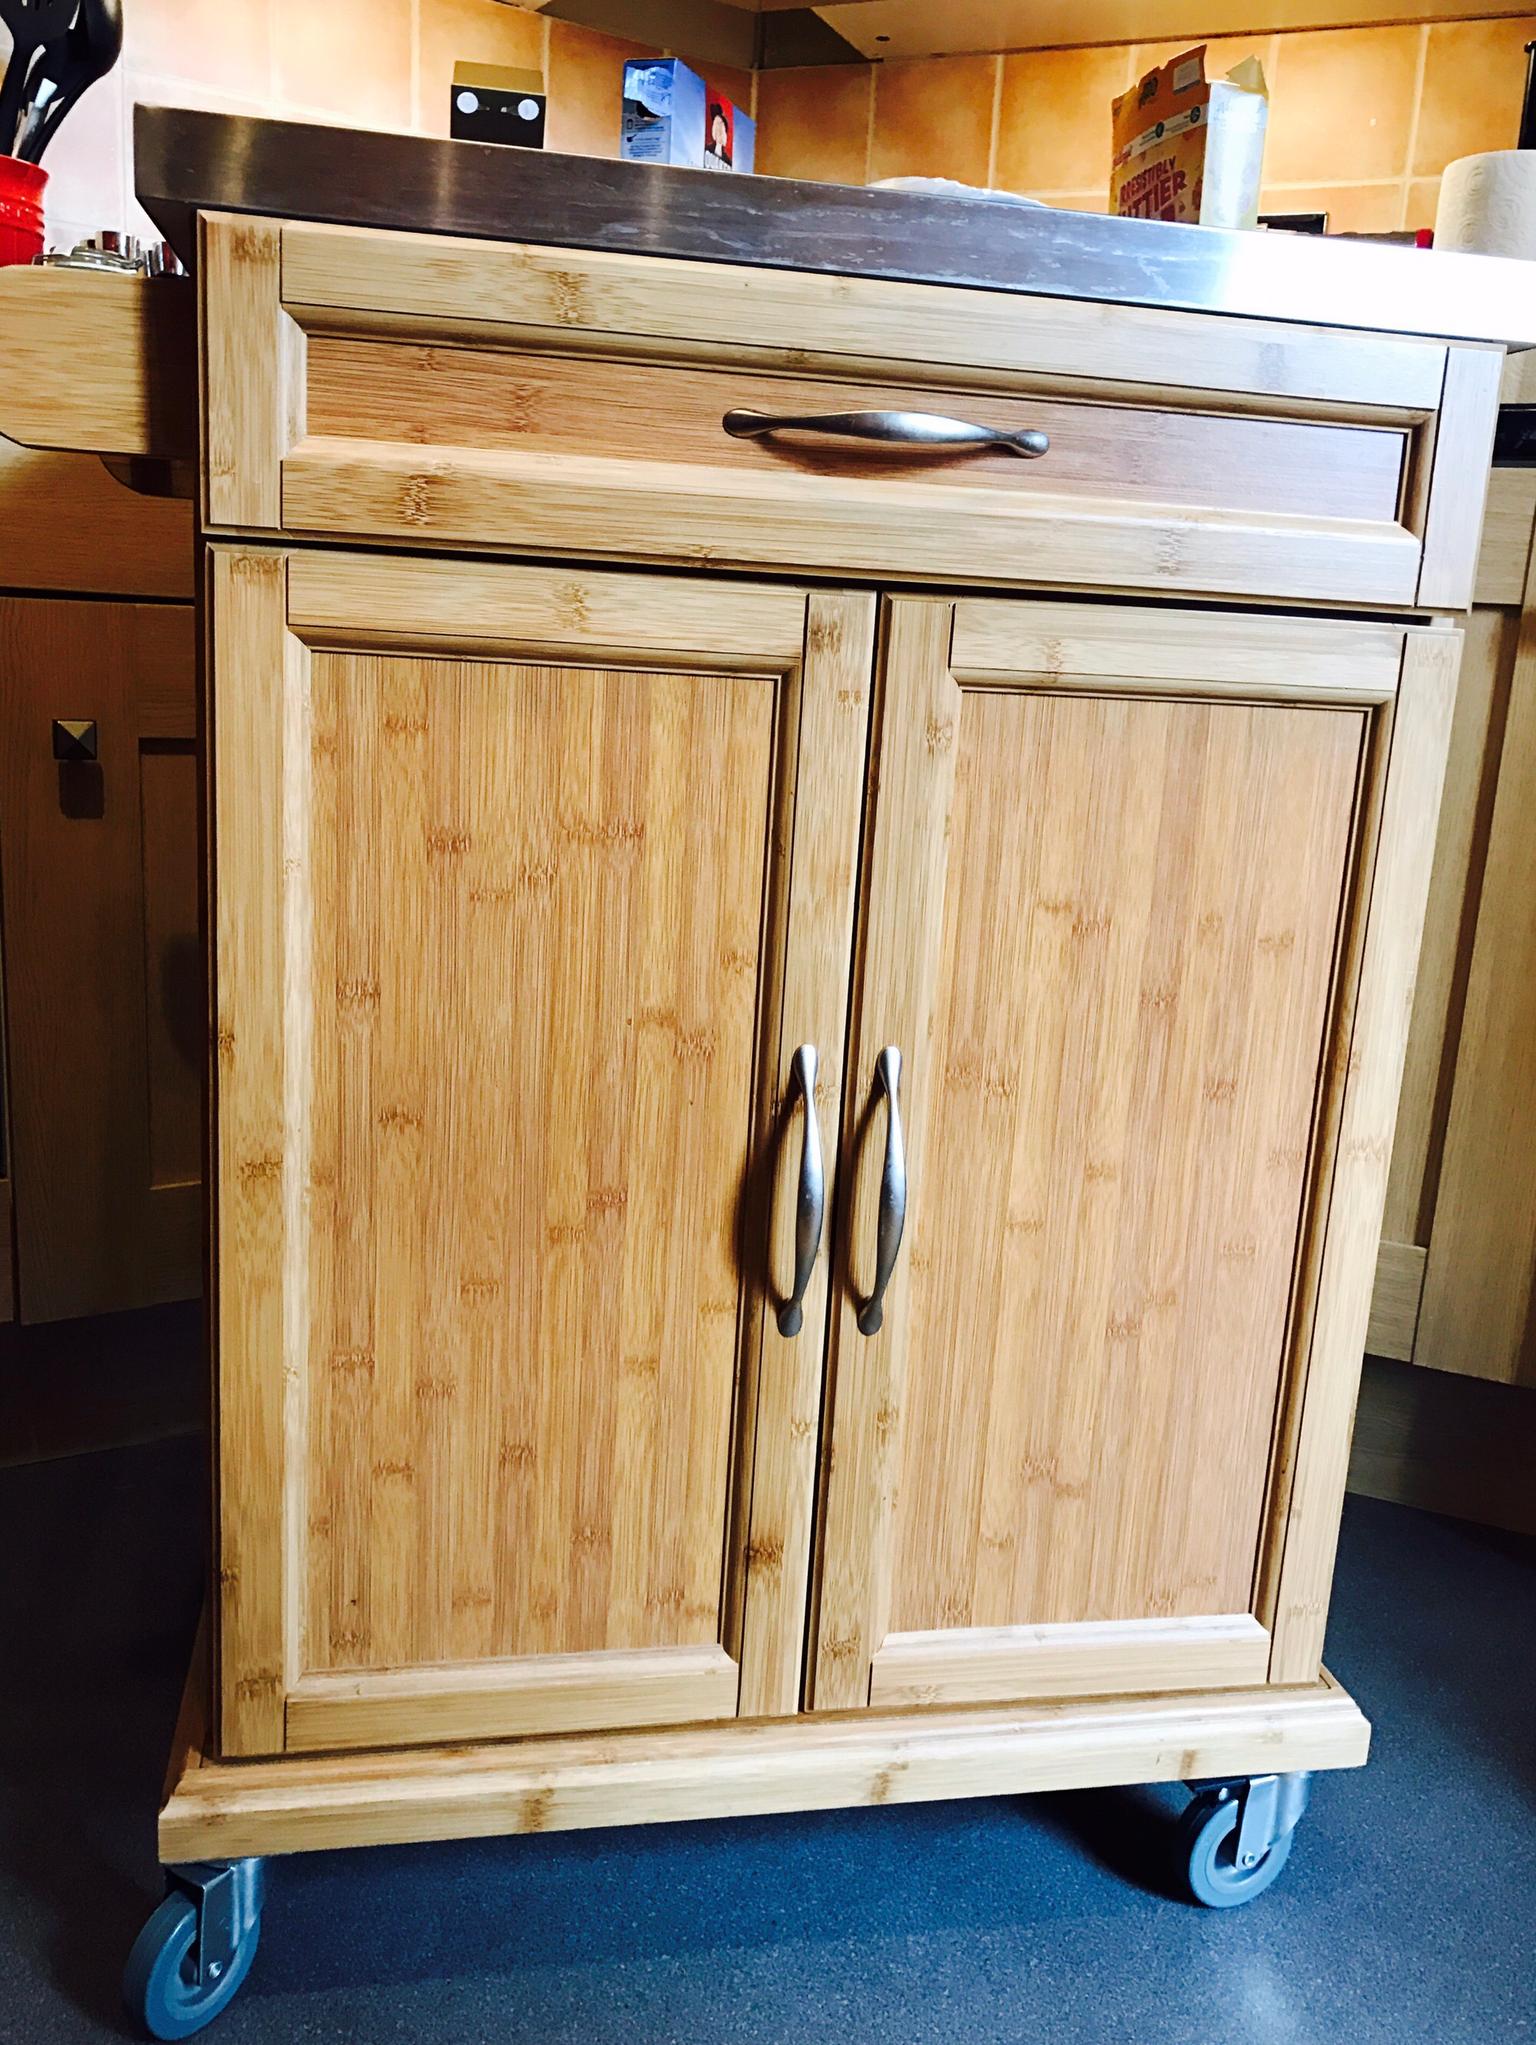 Bamboo Kitchen Cabinet In W9 London For 40 00 For Sale Shpock